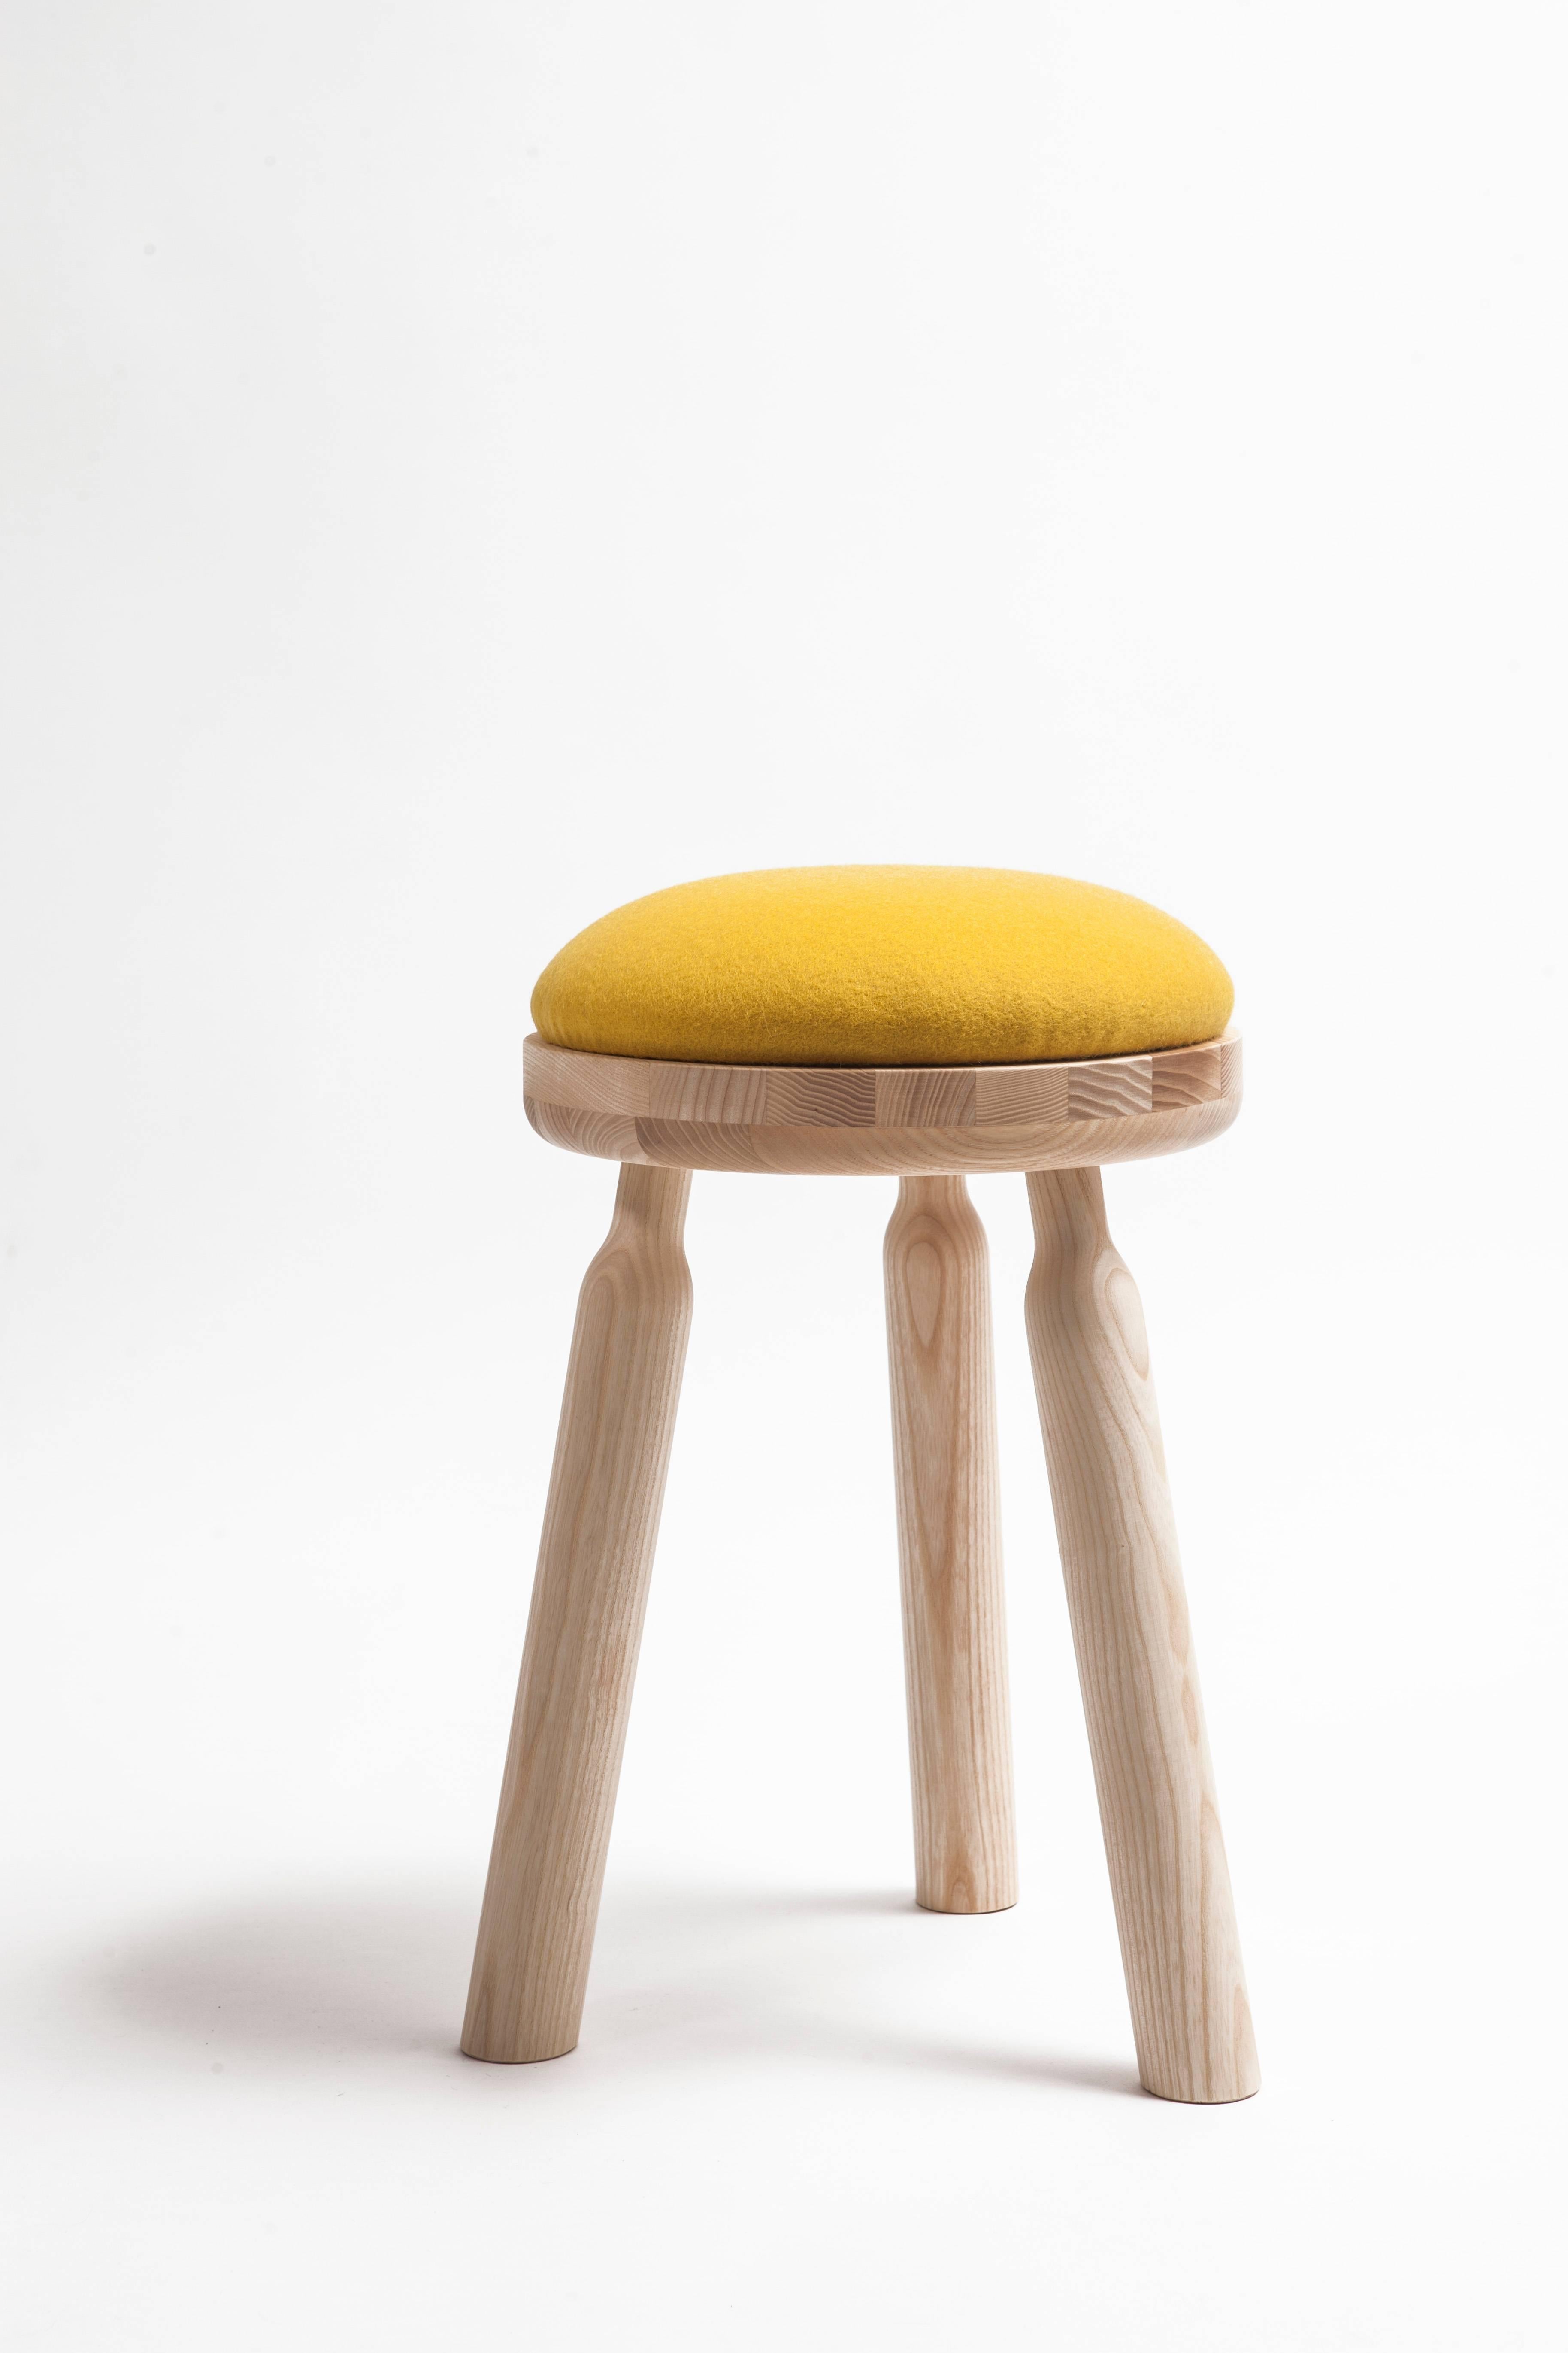 The Ninna stool structure is entirely crafted from hand-turned ashwood materials. The assembly points are tapered to form a sleek bottleneck shape similar to the design of the Ninna armchair.
Small, robust and colored, the Ninna stool is perfect